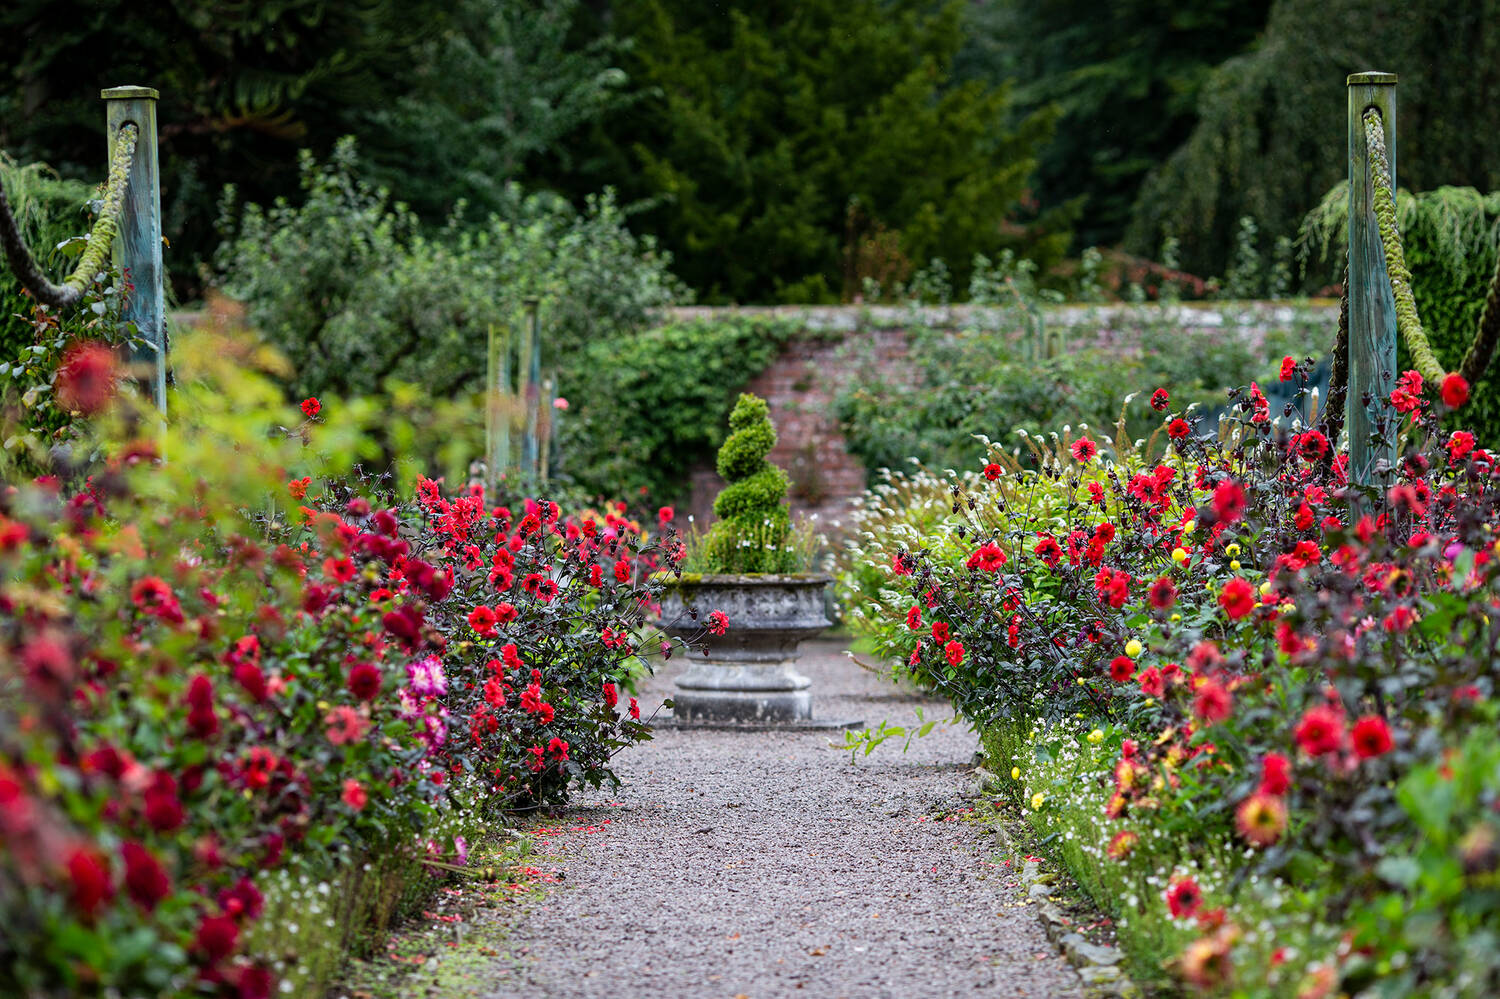 A gravel path leads through a walled garden towards an urn. Colourful flowerbeds line the path.